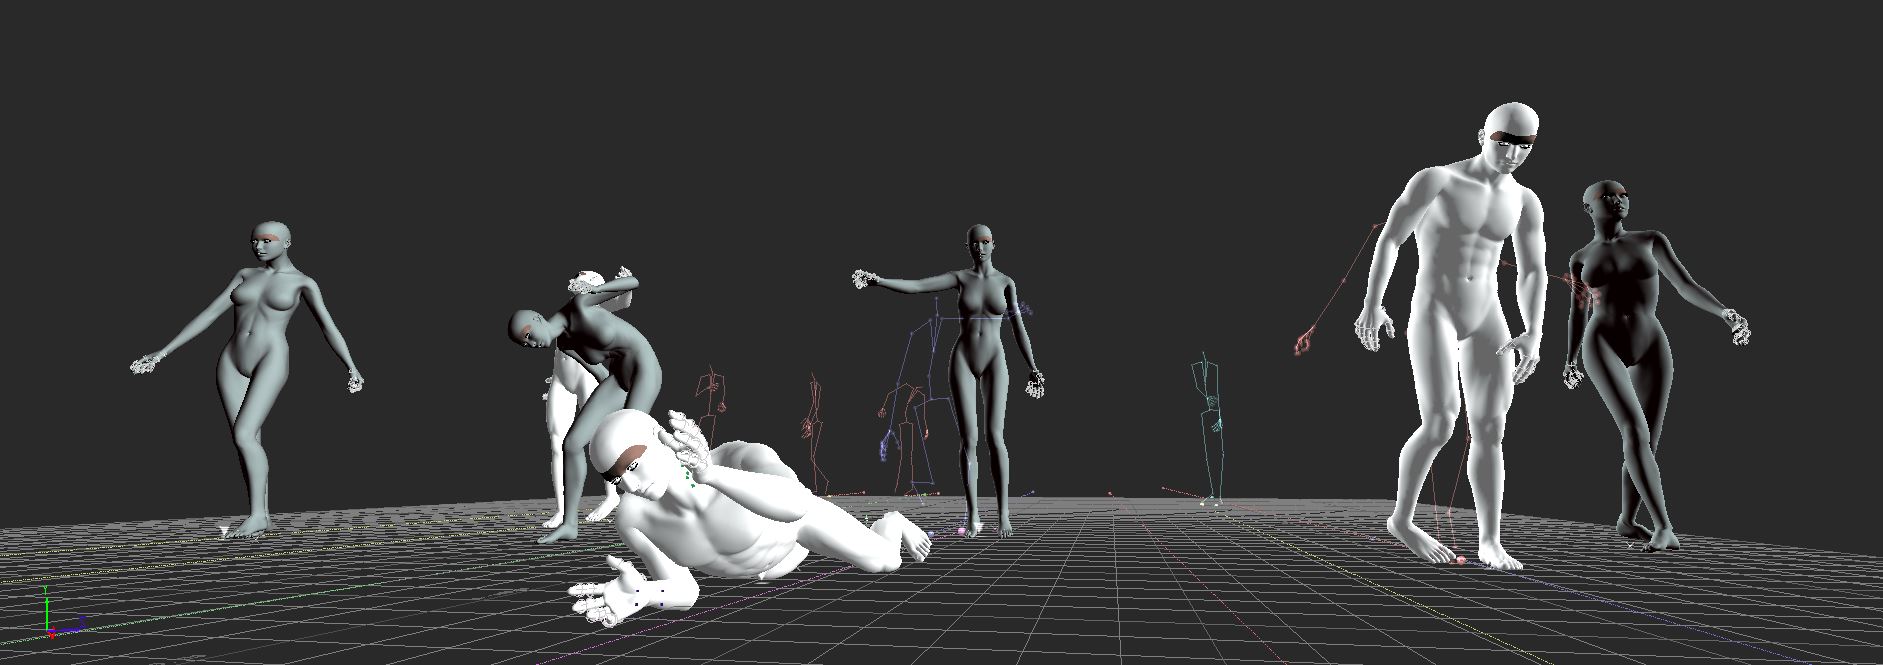 The Graphic Film Company relies on iPi Motion Capture for previs and to track zombie motions in the upcoming feature film "Night of the Living Dead Origins."